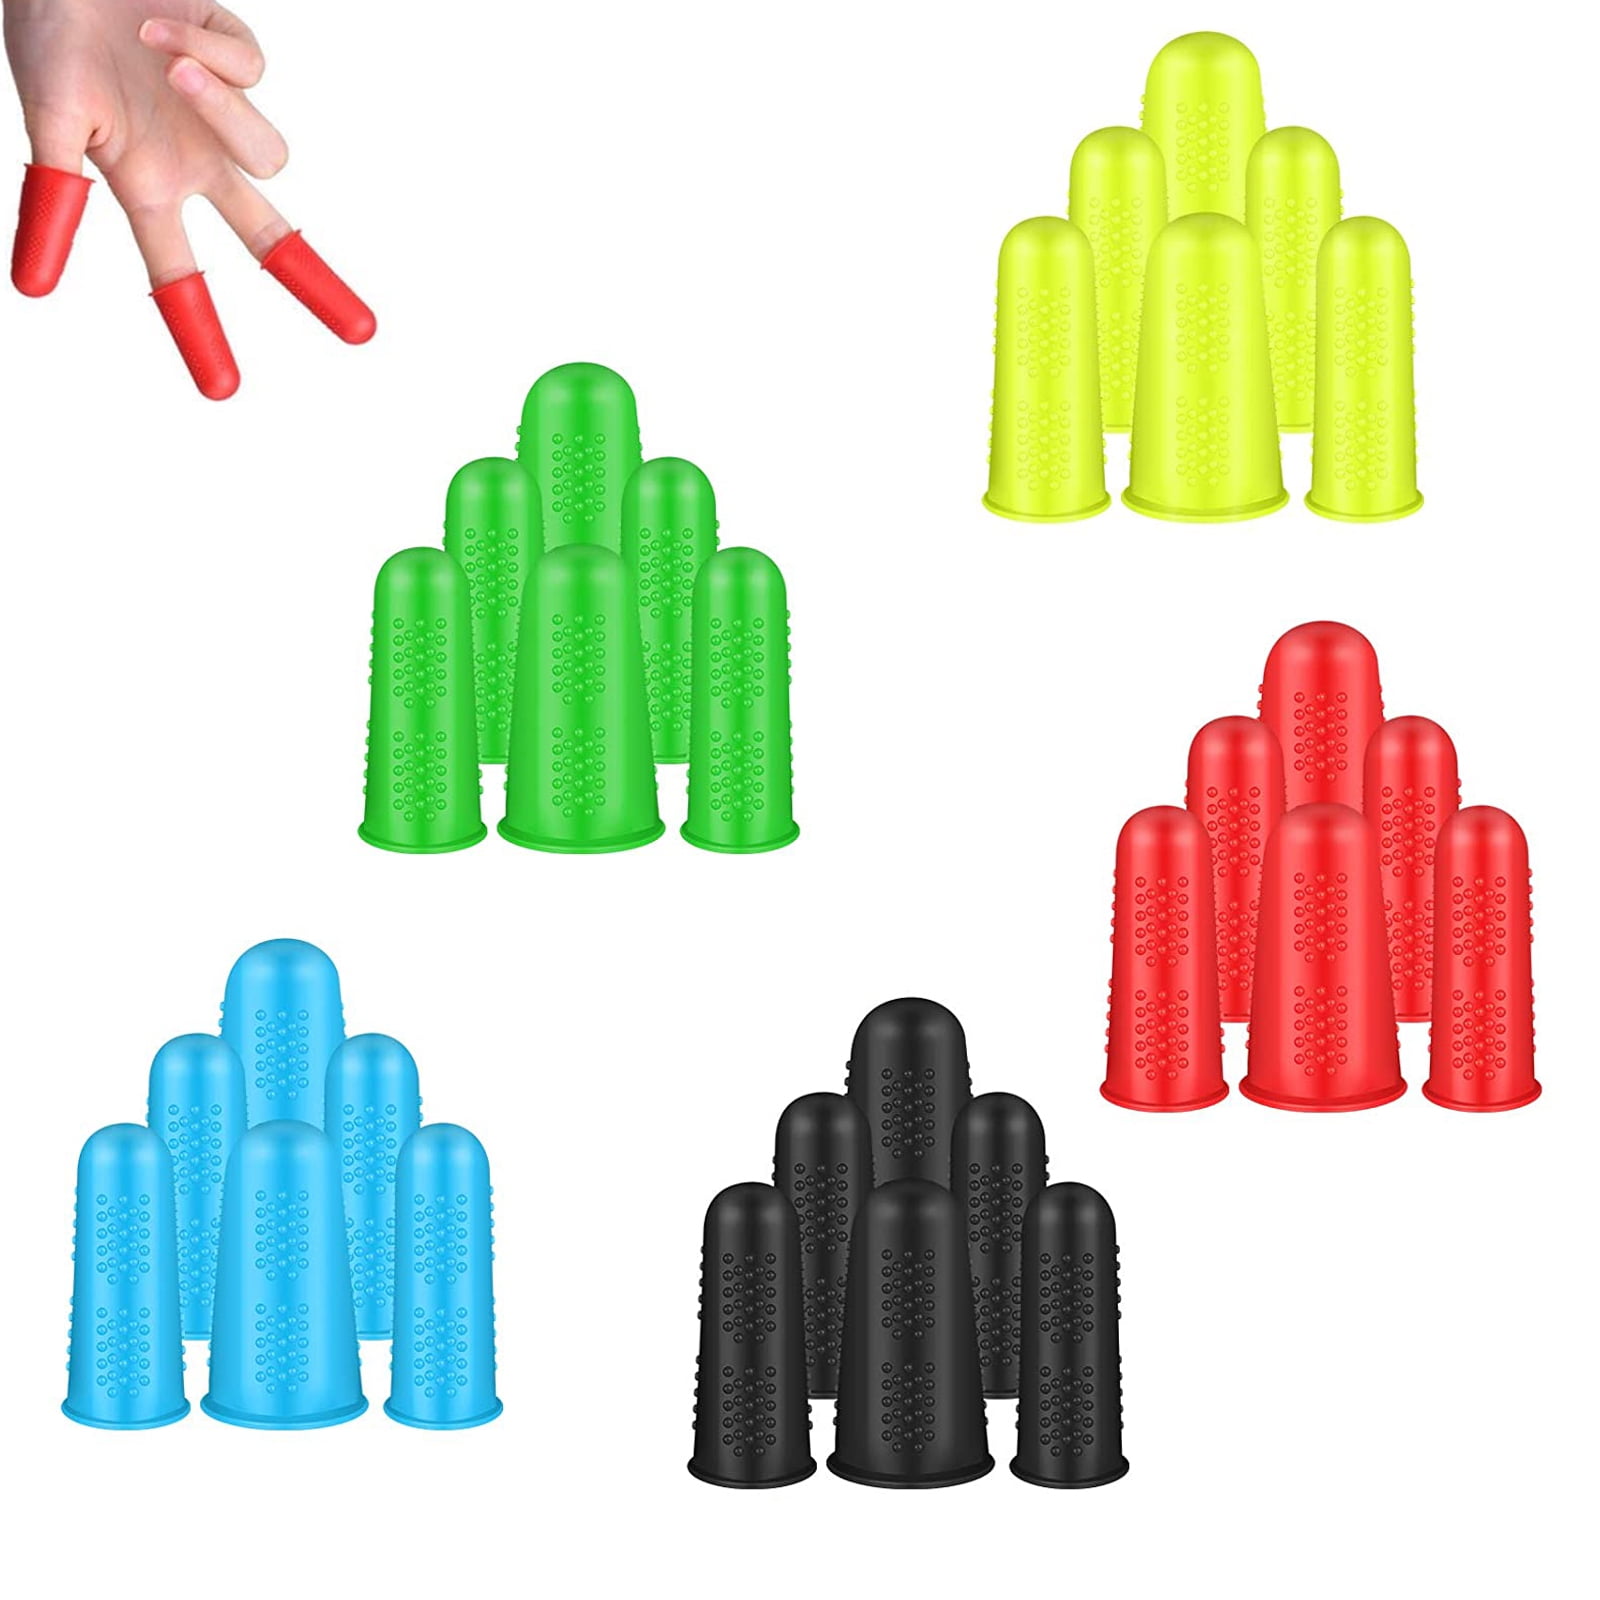 Crafters Toolkit Silicone Finger Protectors